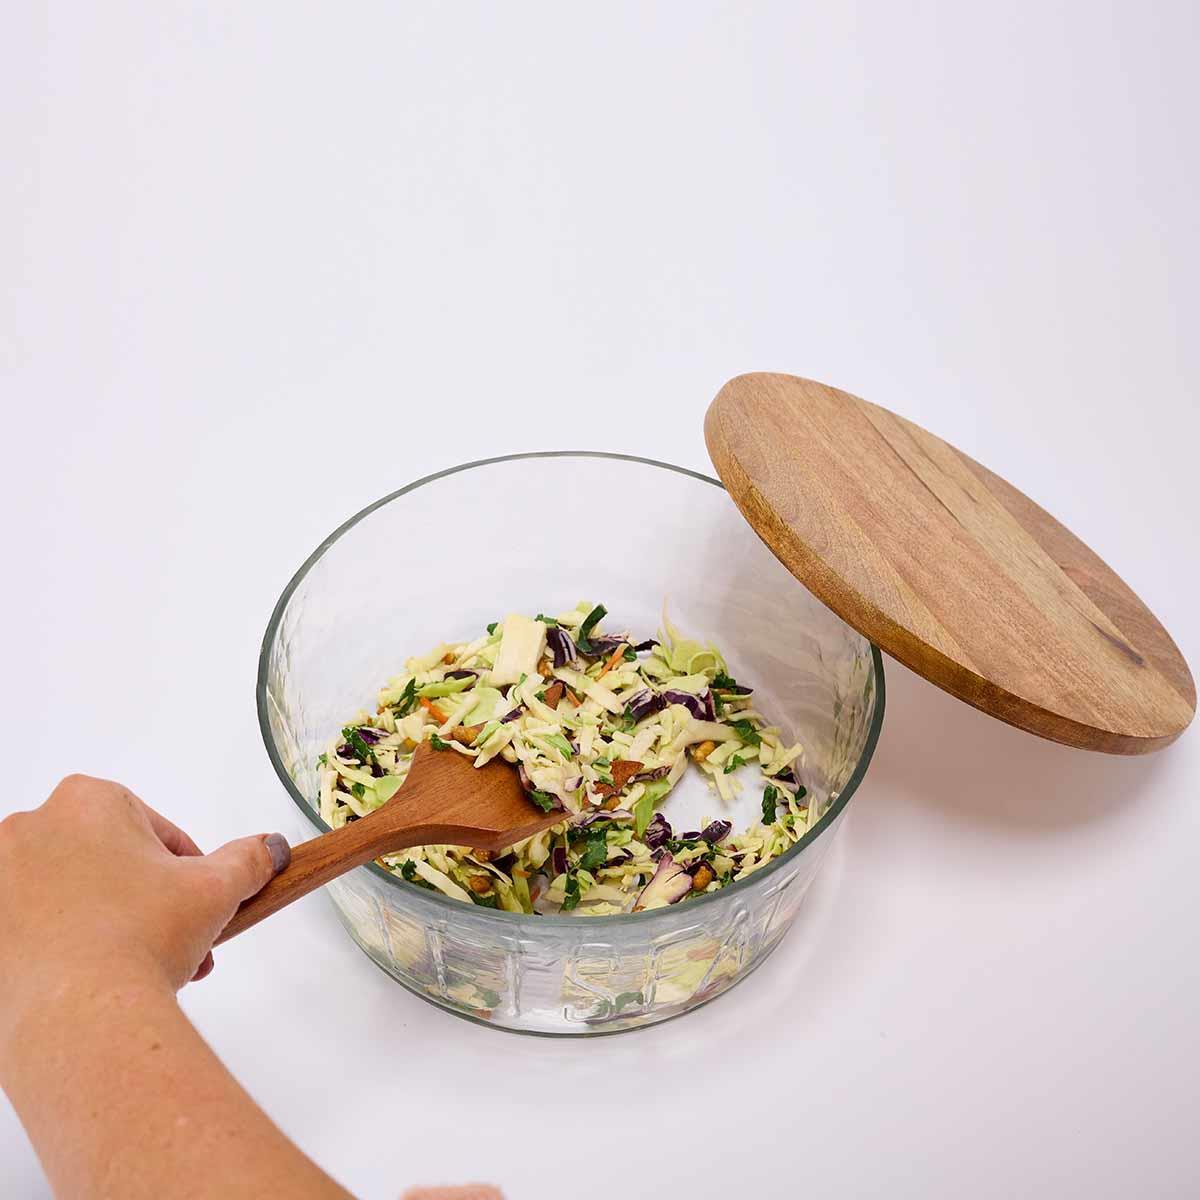 a persons hand stirring a salad in the let's eat glass bowl set on a white background